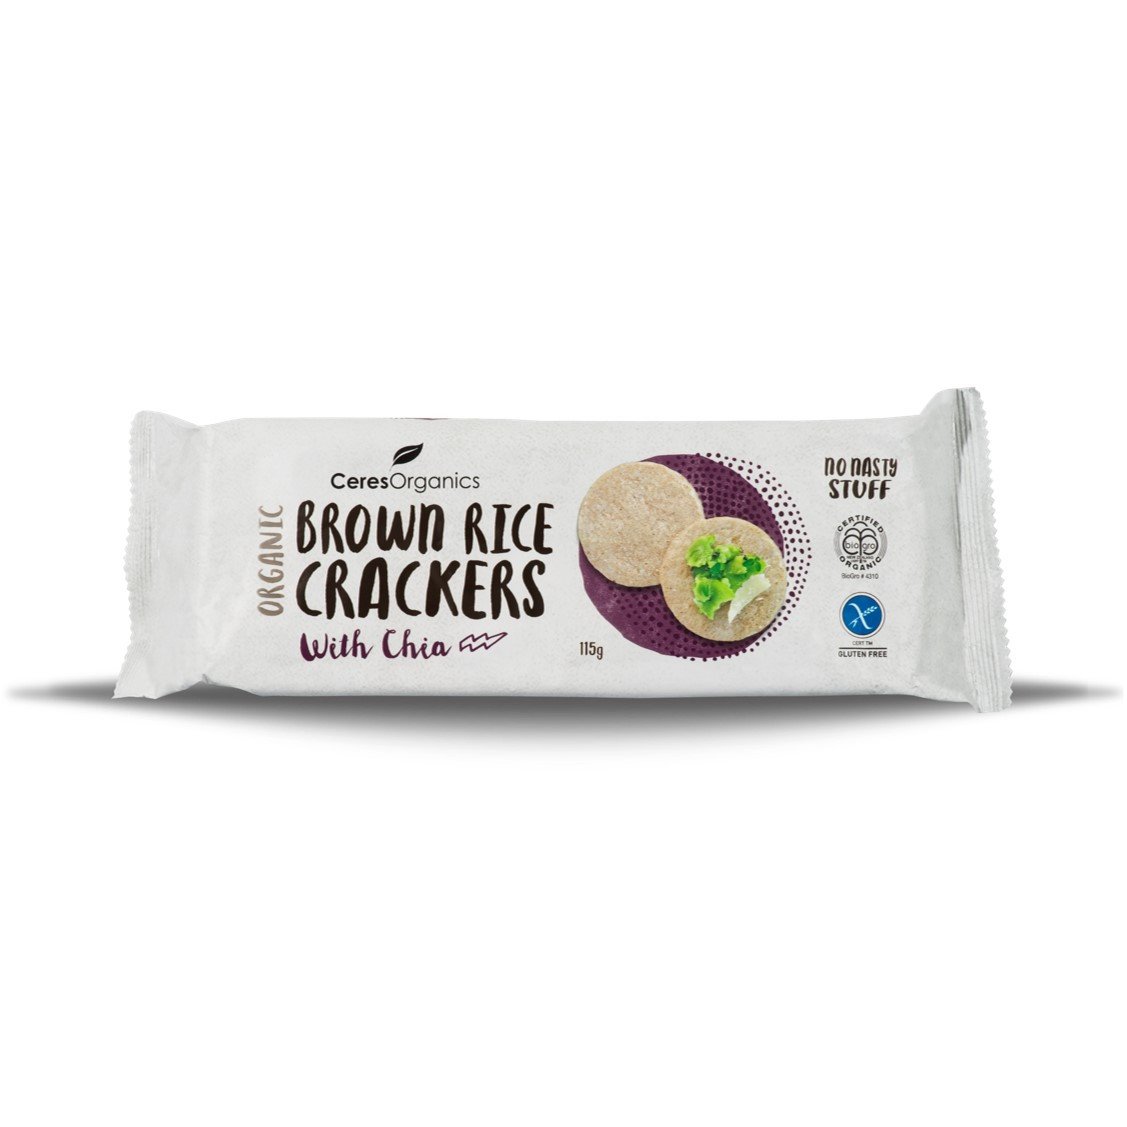 Ceres Organics Brown Rice Crackers - with Chia, 115 g